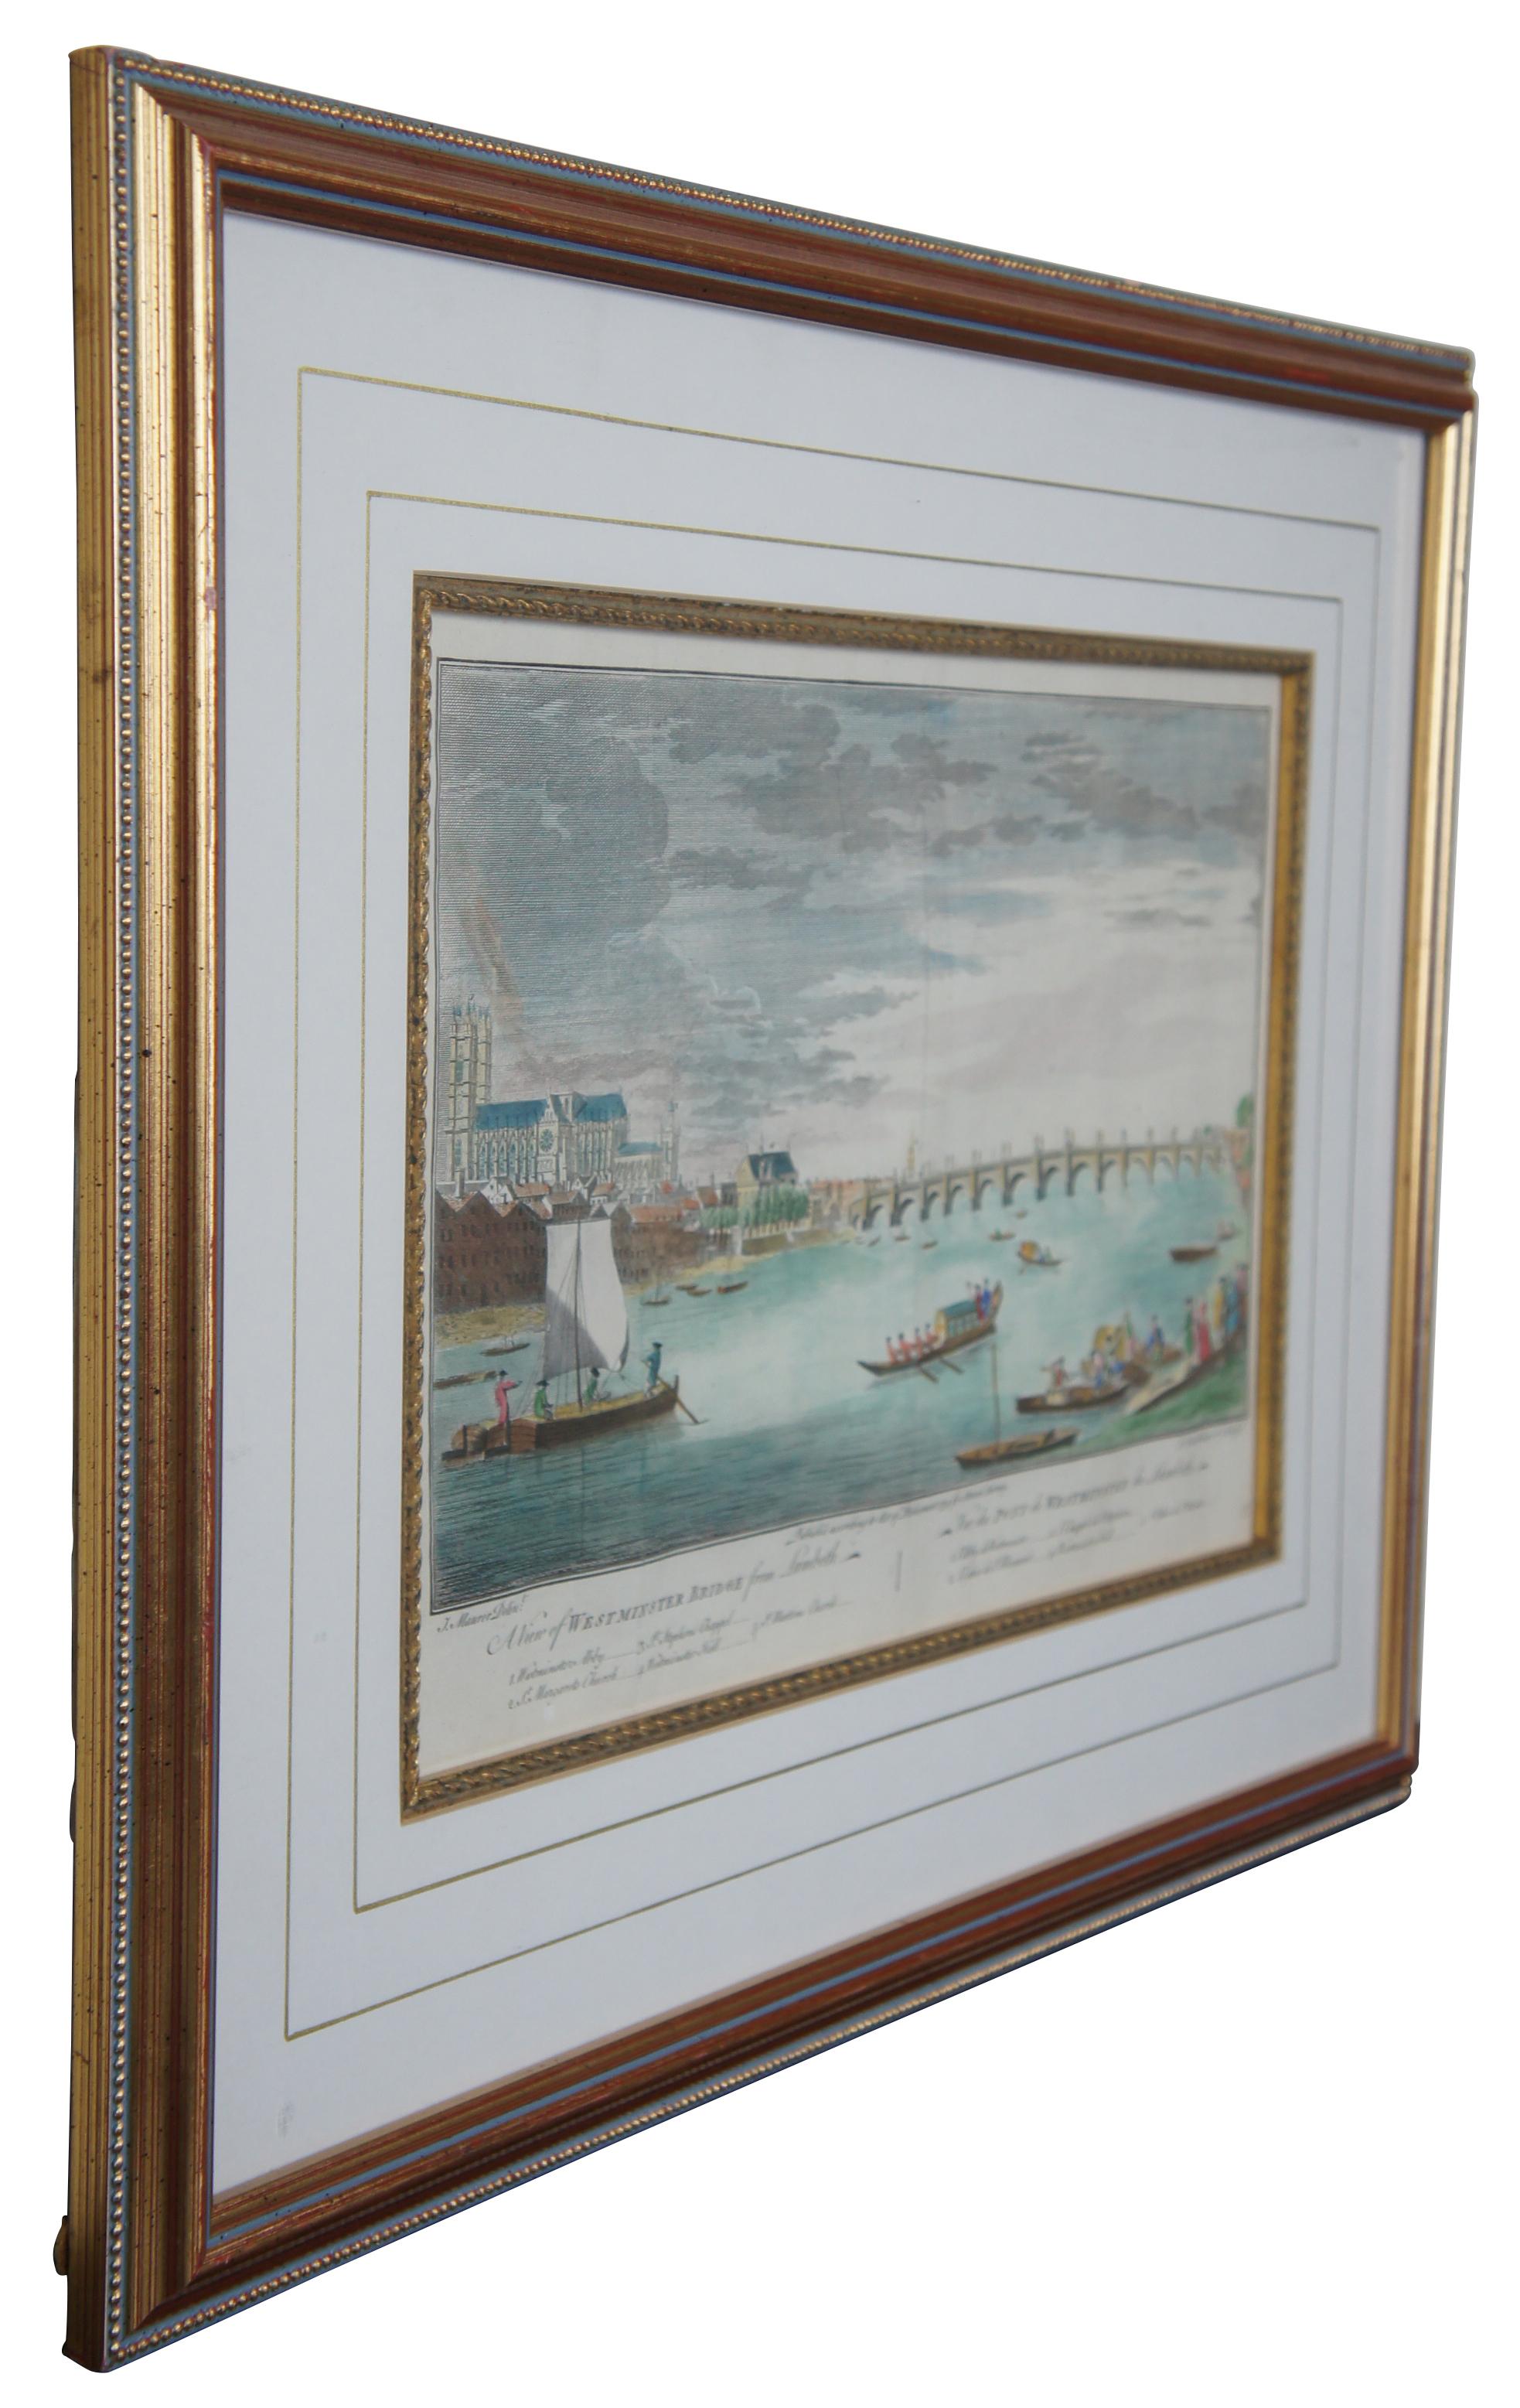 Antique hand colored riverscape / landscape copperplate engraving based on a painting by Jacob Maurer and engraved by Paul Fourdrinier - A View of Westminster Bridge from Lambeth, published according to Act of Parliament 1754 for Stowe’s Survey of